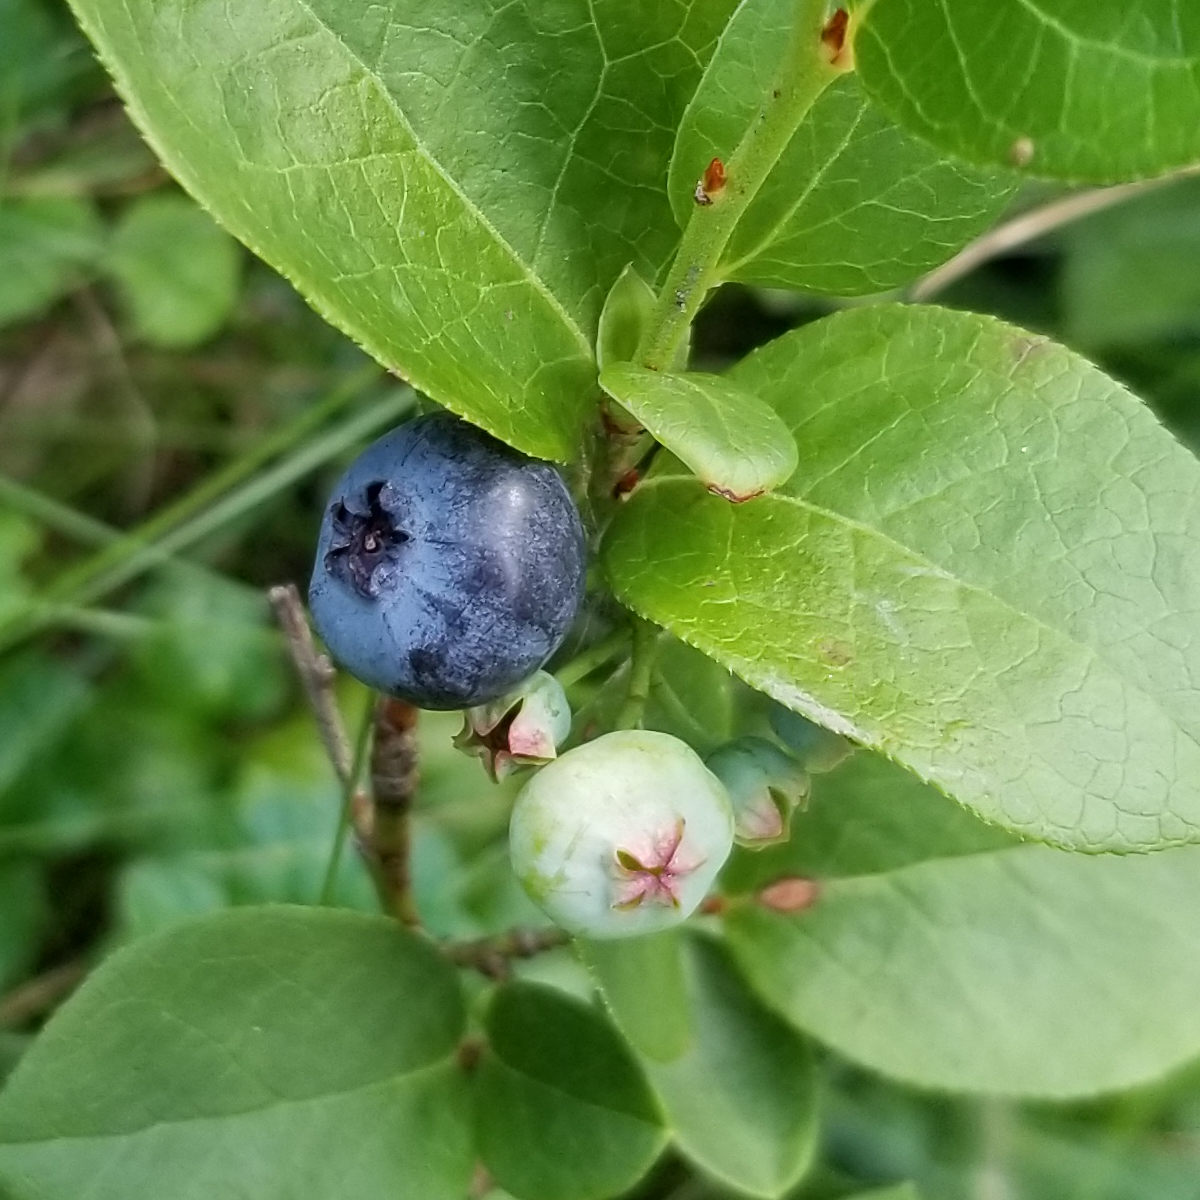 A zoomed in image of one ripe and one unripened blueberry on a plant.